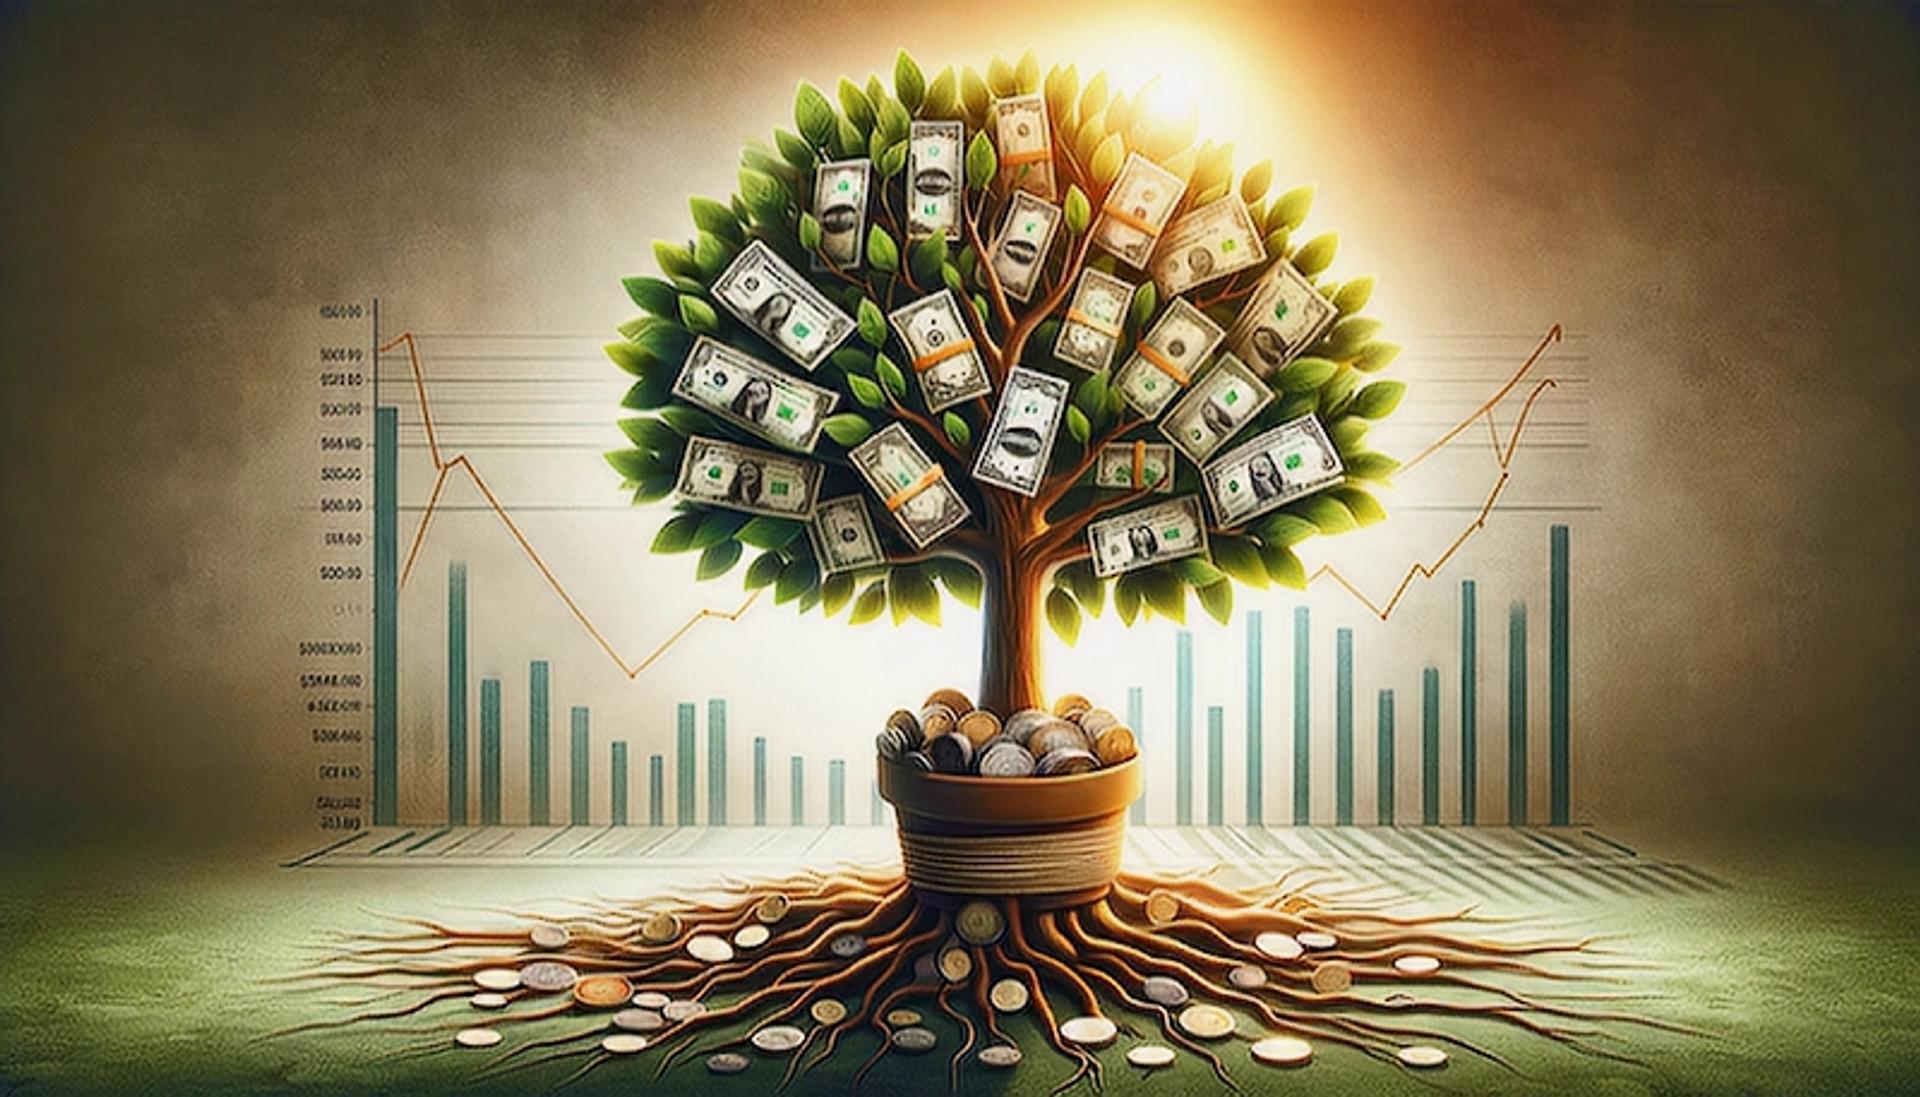 Digital image of a tree growing dollar bills, with the tree roots sprawling out from coins